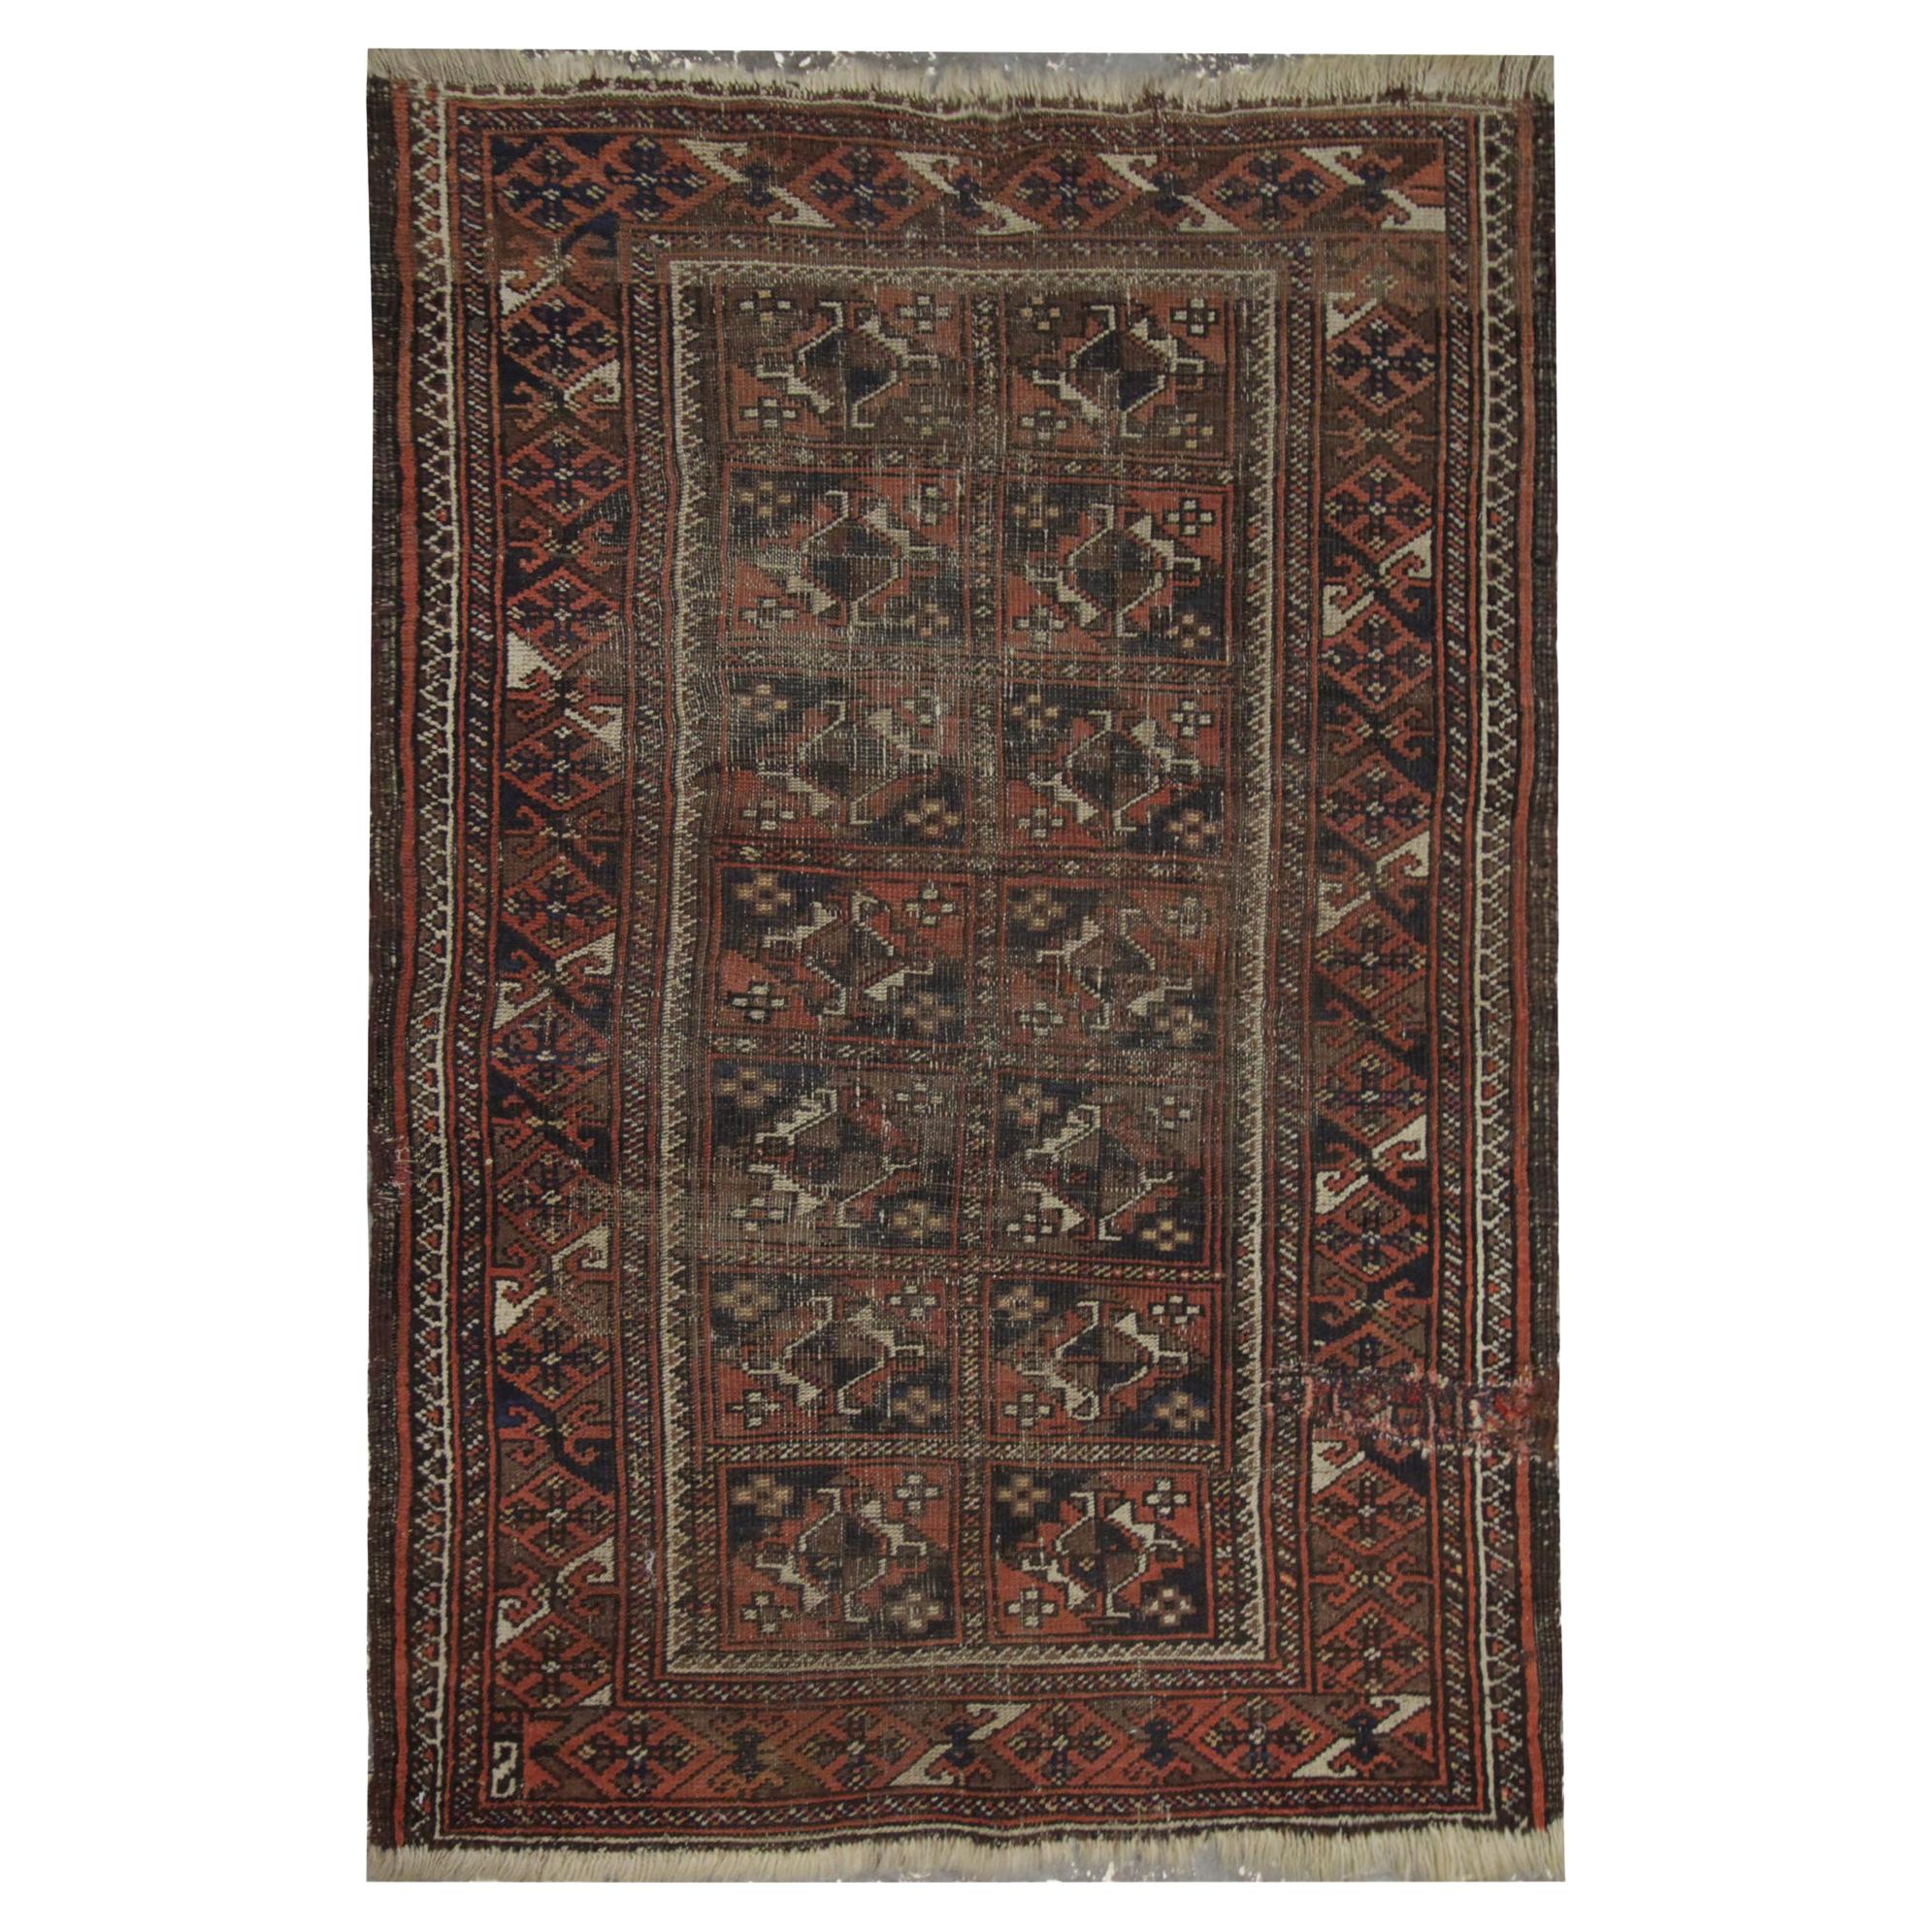 Antique Rugs Handwoven Red Area Wool Oriental Carpet